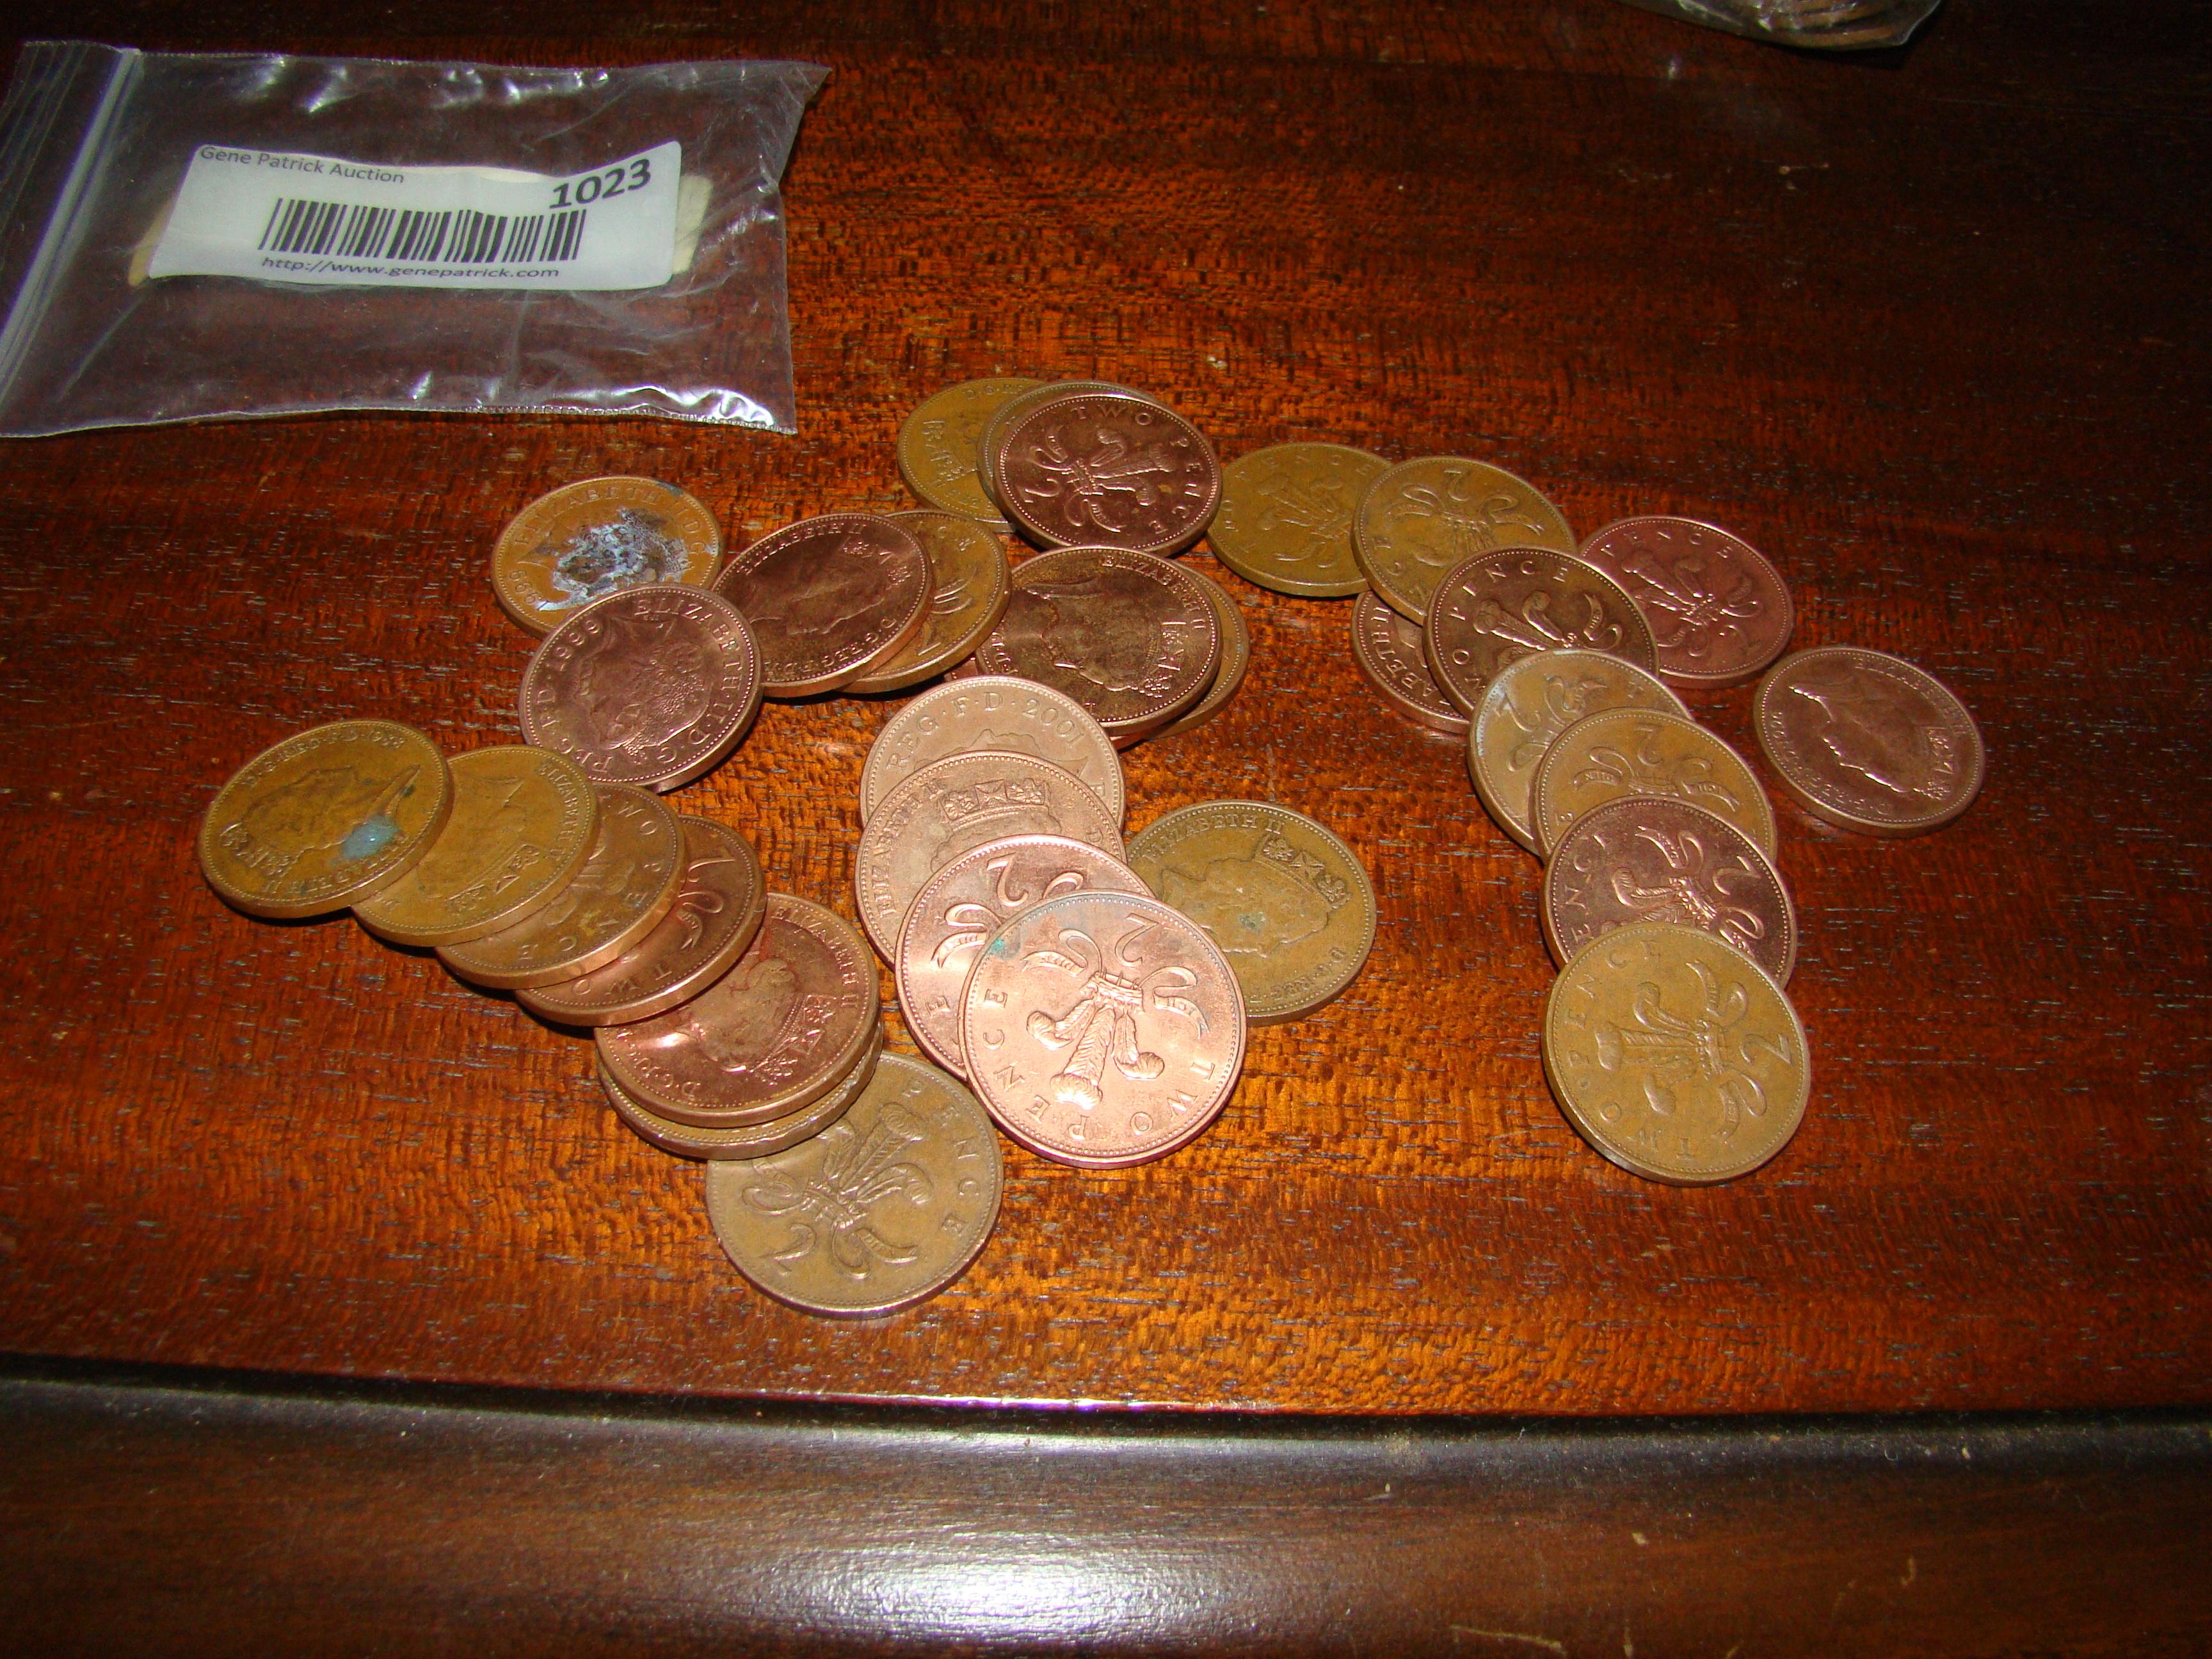 BAG OF 2 PENCE COINS